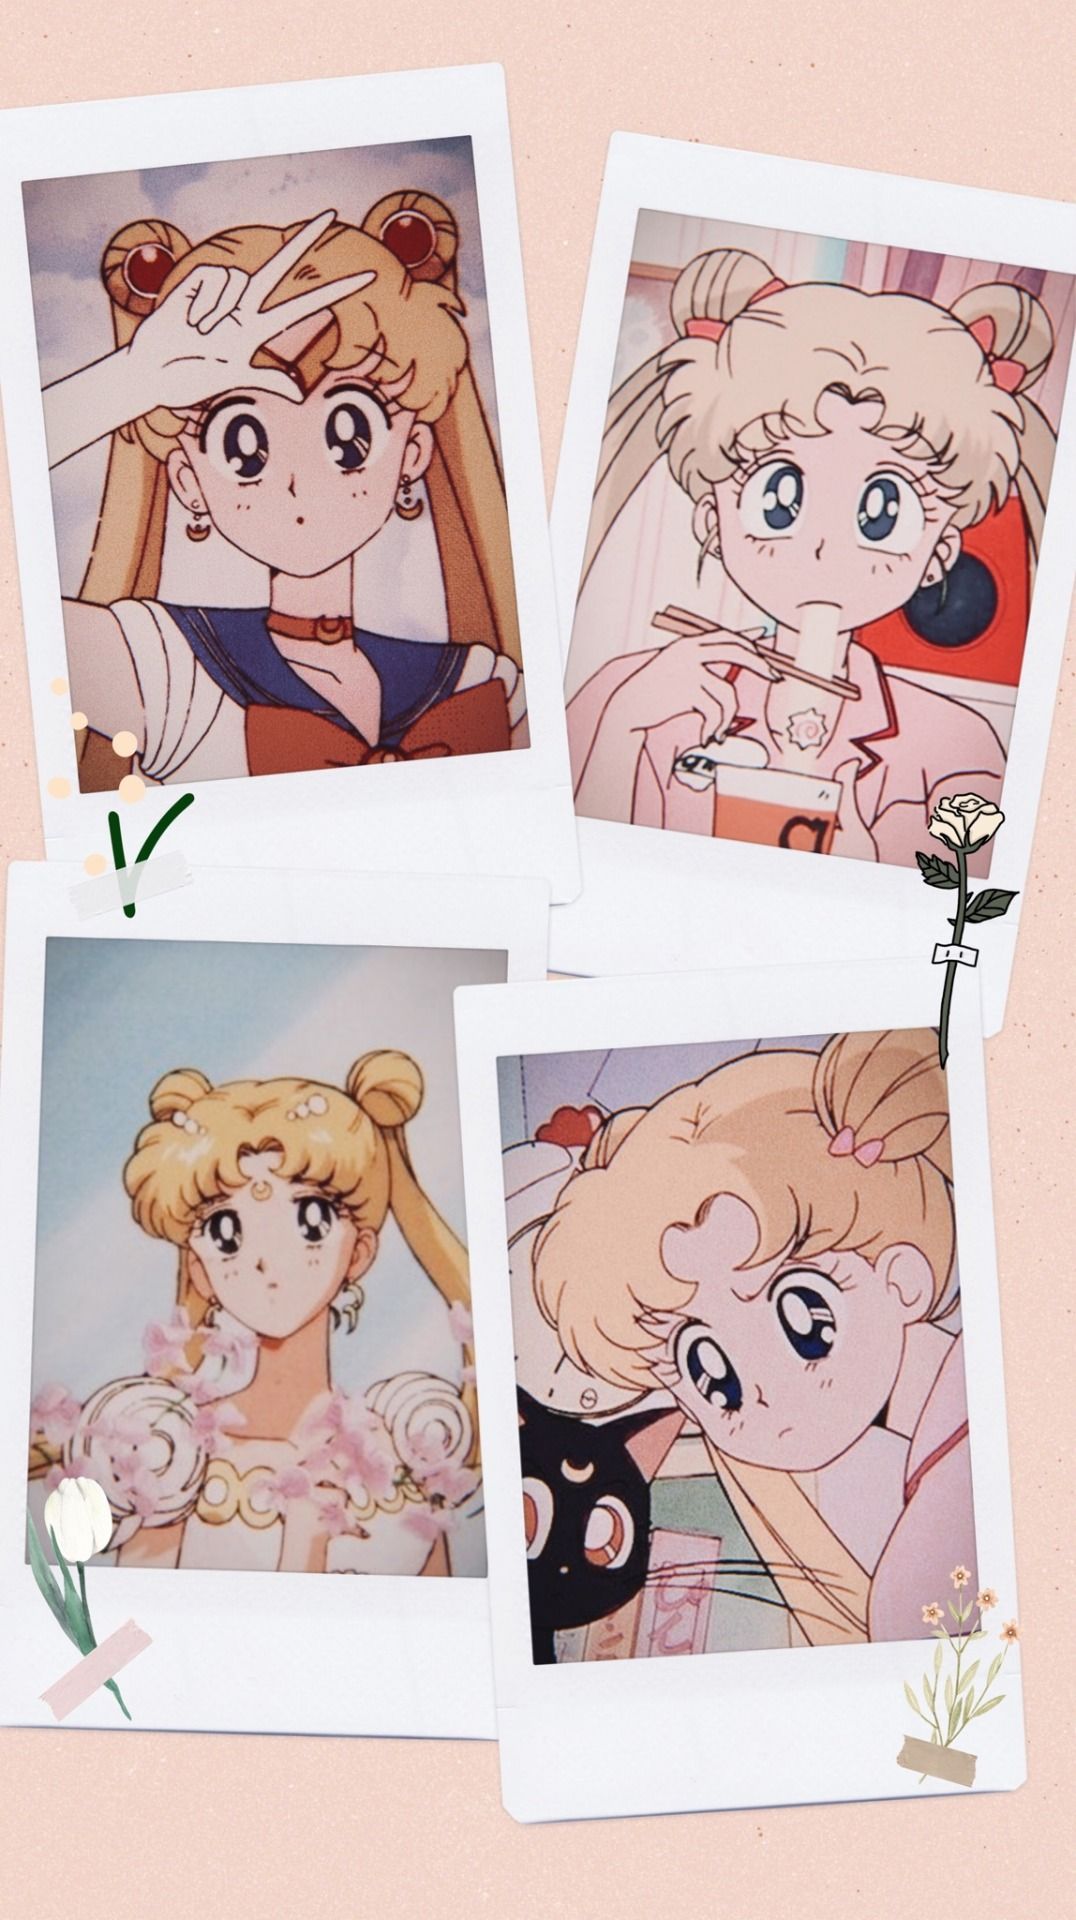 Four pictures of sailor moon and her friends - Sailor Moon